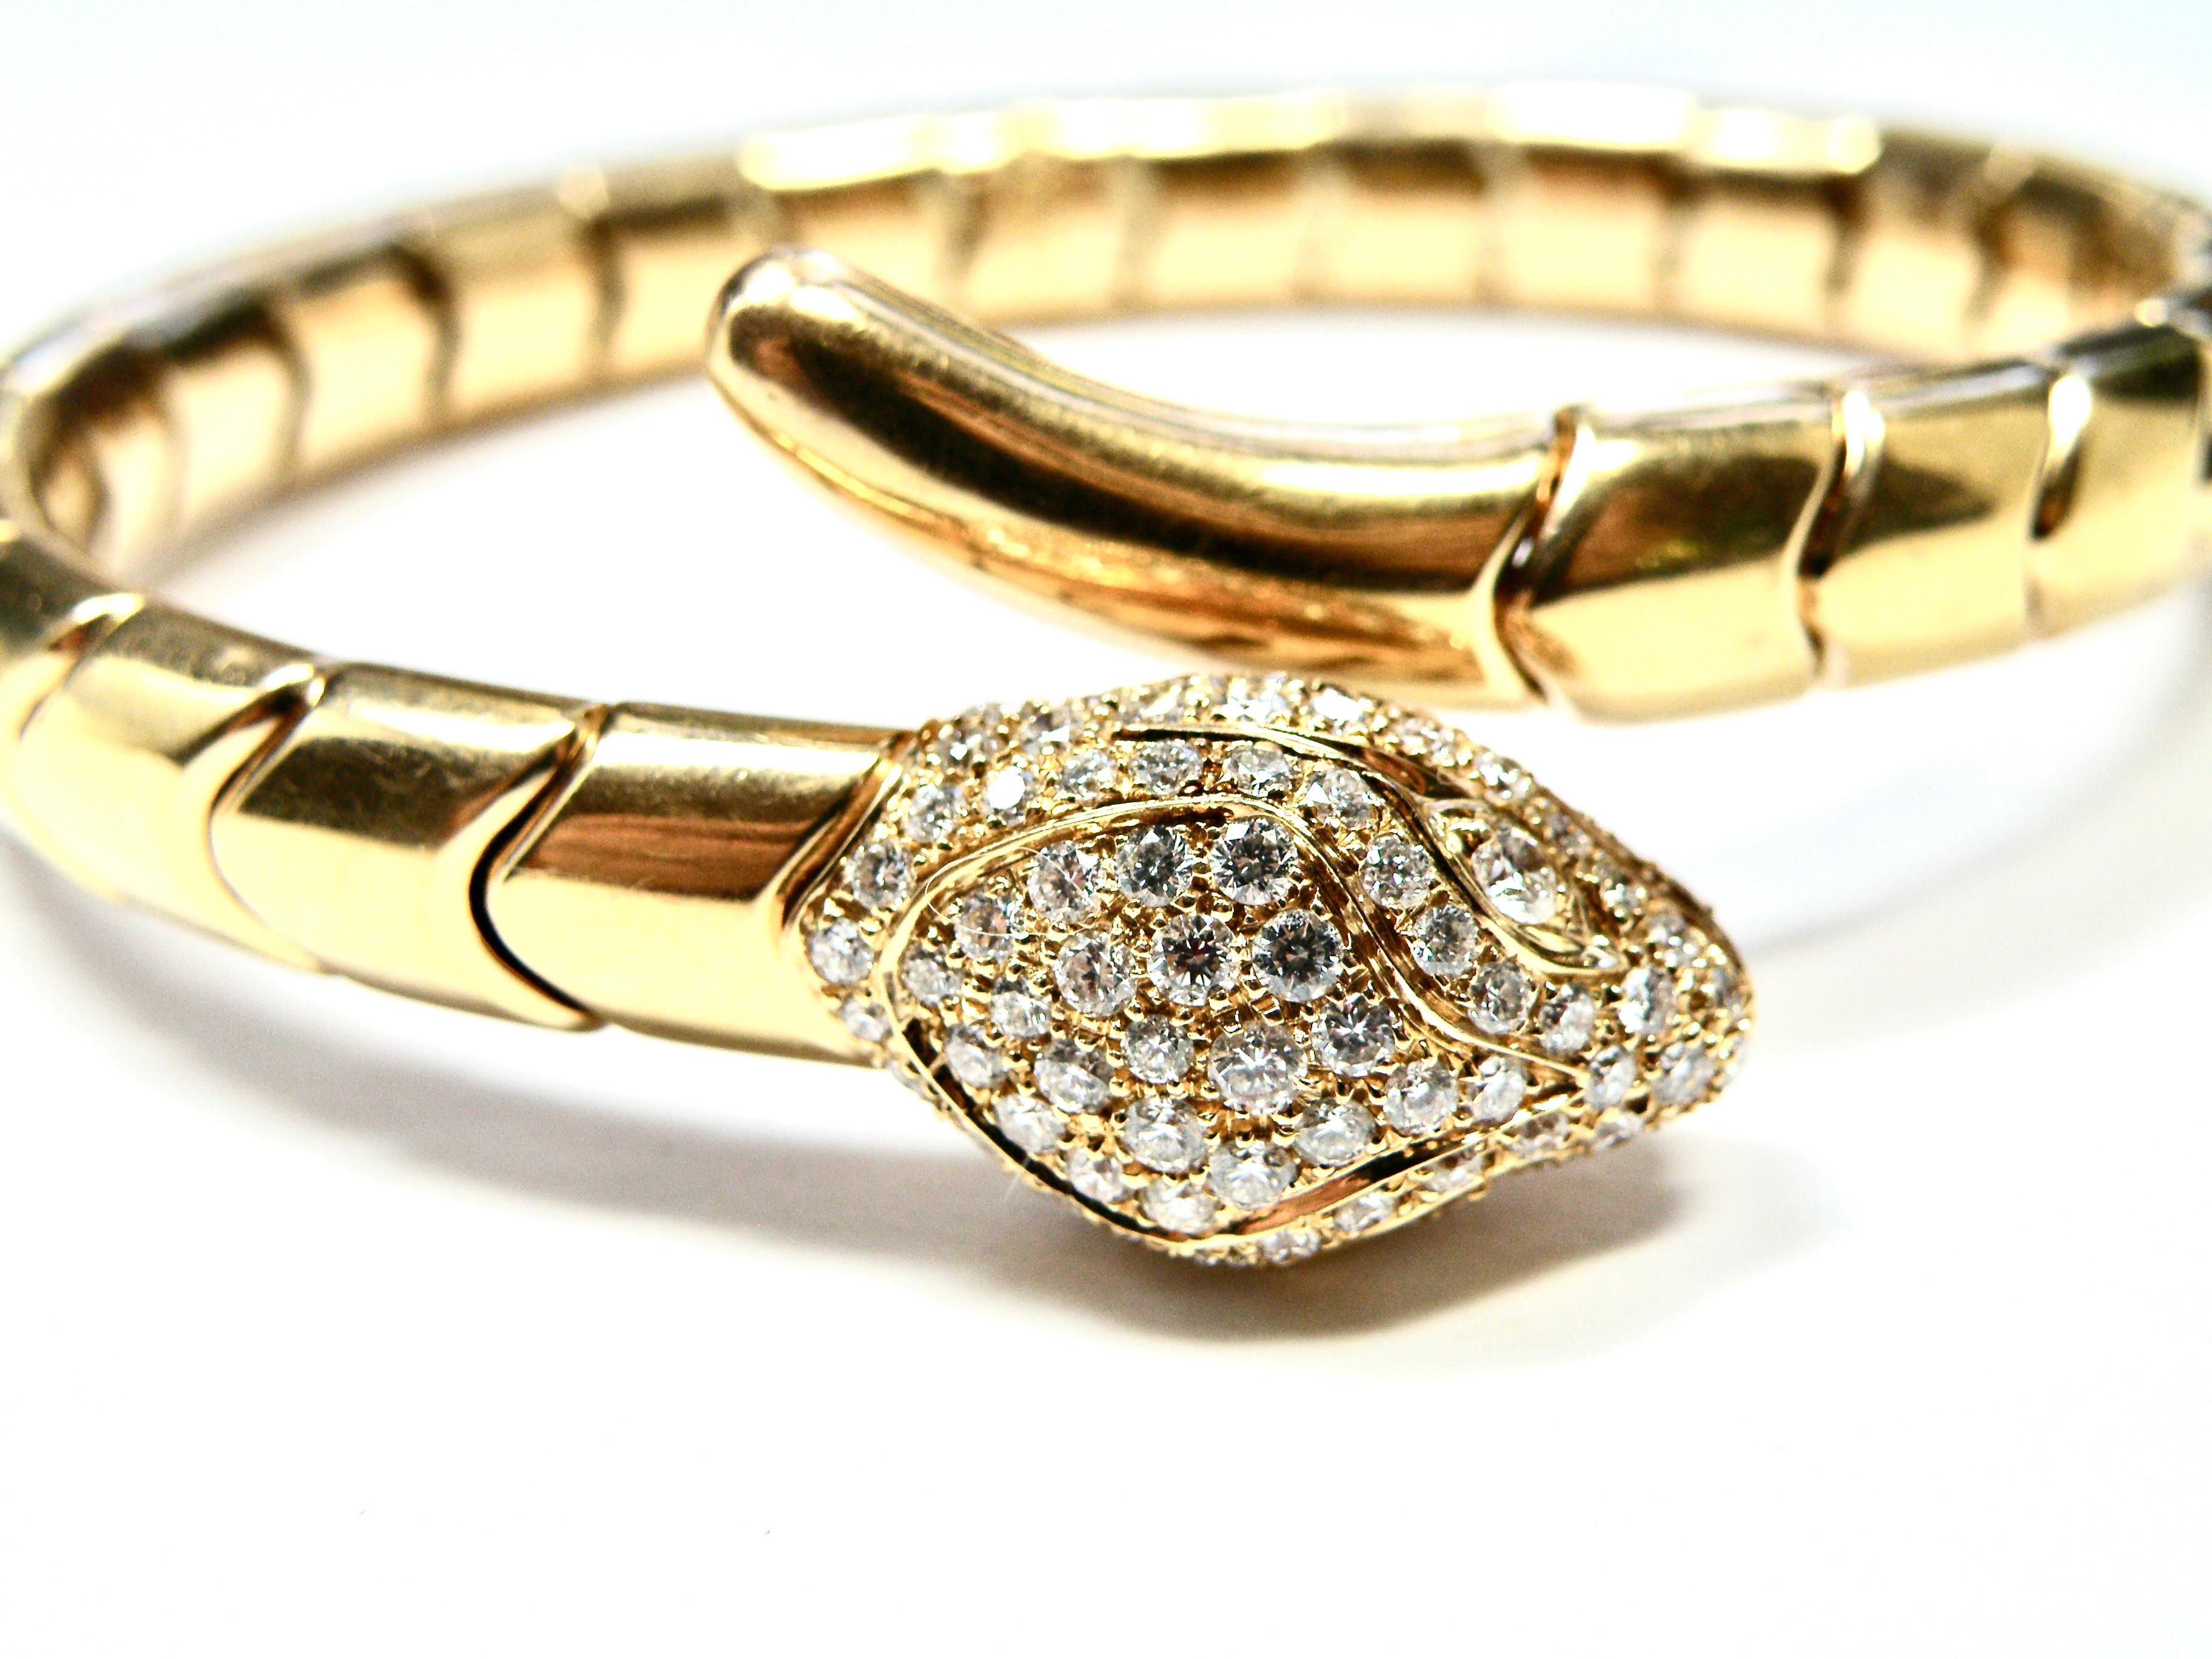 18k snake bracelet with Pave set diamond head by Leo Pizzo In New Condition For Sale In Cohasset, MA